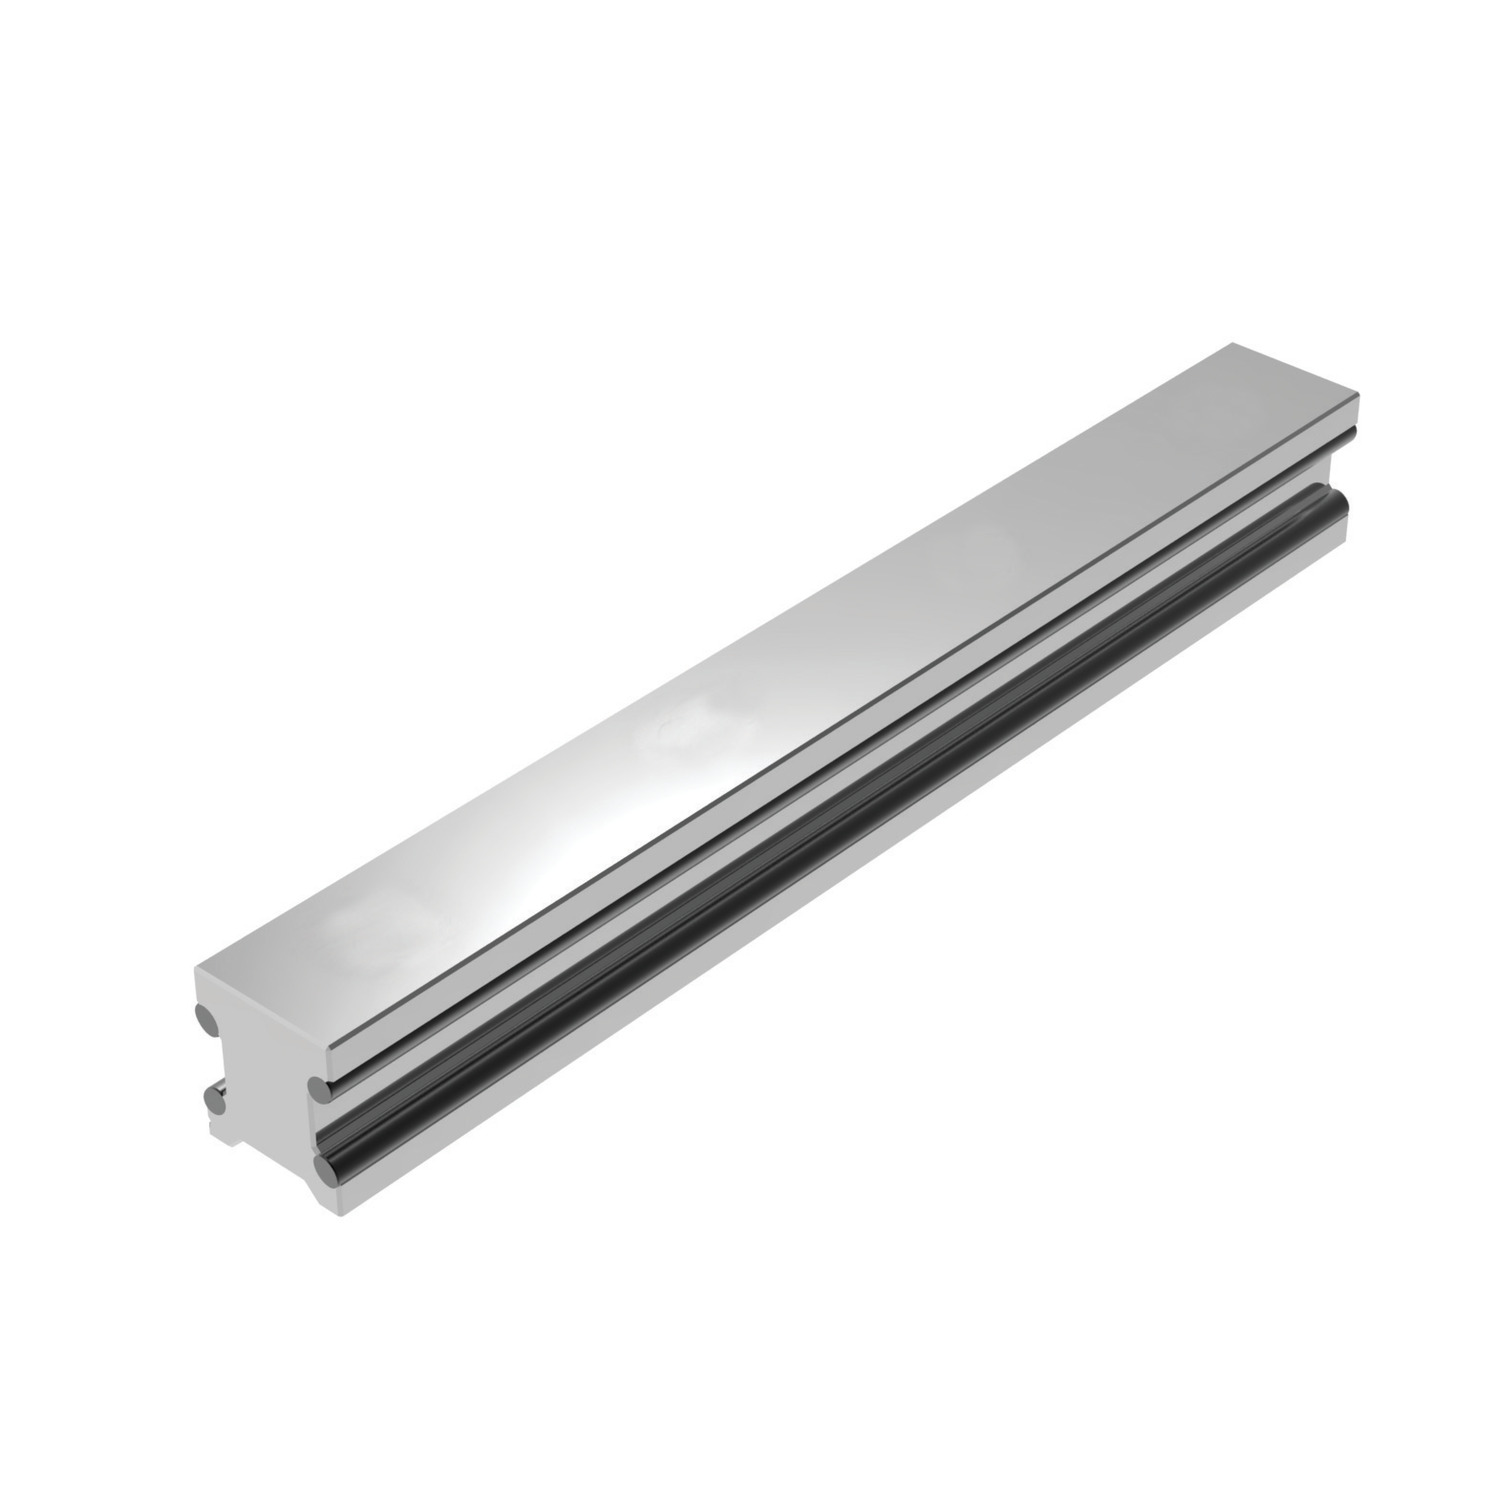 Product L1018.15, 15mm Aluminium Linear Guide Rail rear fixing with stainless raceways / 